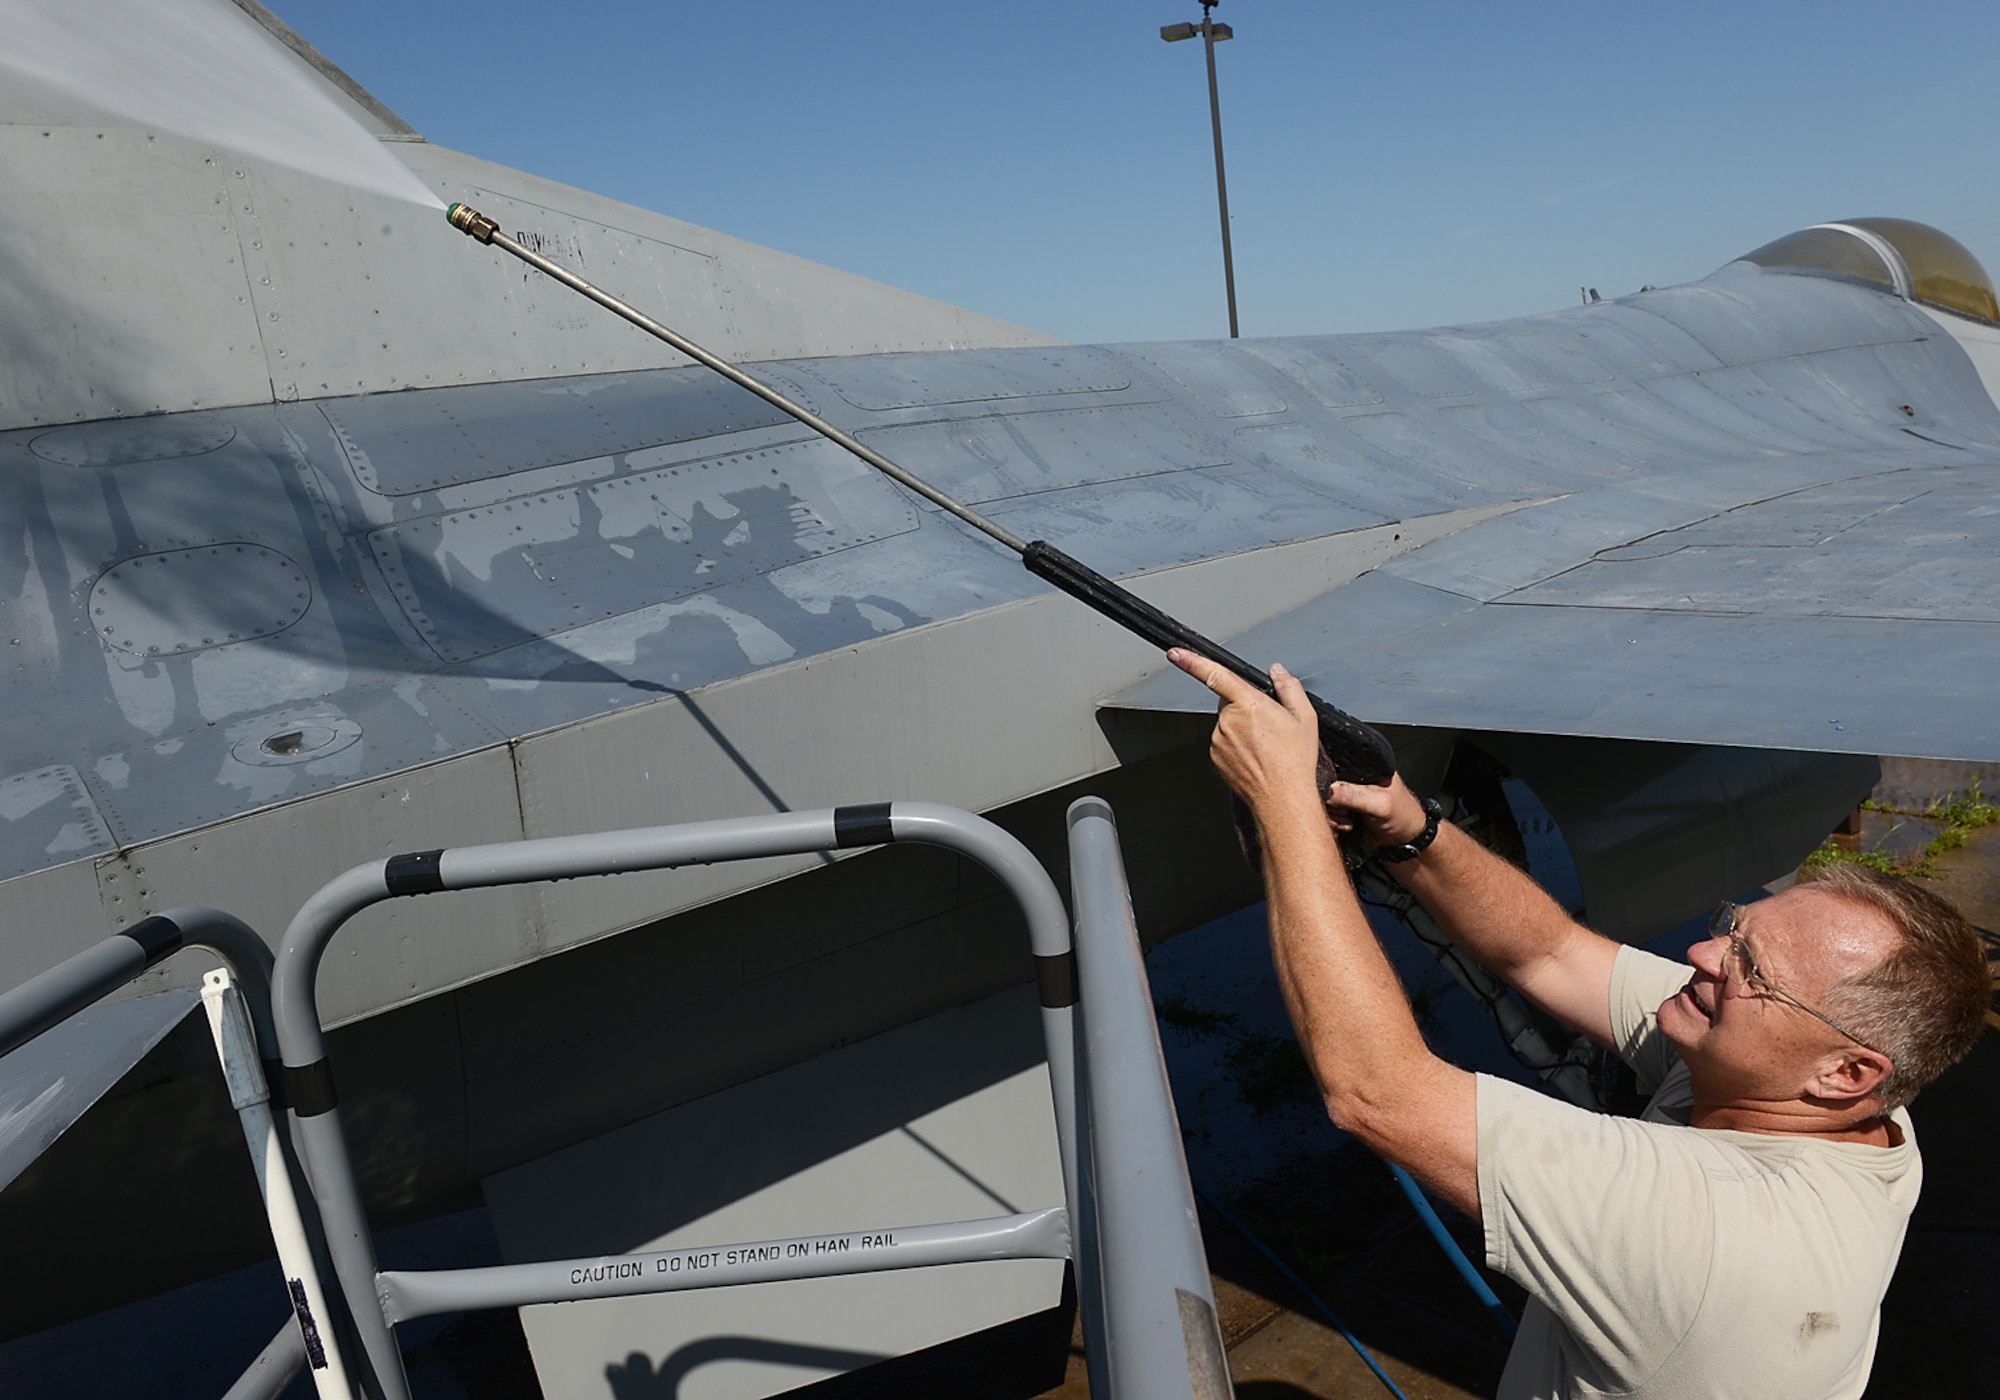 Chief Master Sergeant Jim Embrey, 138th Maintenance Squadron Chief,  power washes the fuselage of an F-16 static display aircraft at the Tulsa Air National Guard base, Tulsa Okla., 29 July 2014.  Members of the 138th FW Chiefs Council gathered to wash the static aircraft in an effort to keep them looking nice for public display.  (U.S. National Guard photo by Senior Master Sgt.  Preston L. Chasteen/Released)